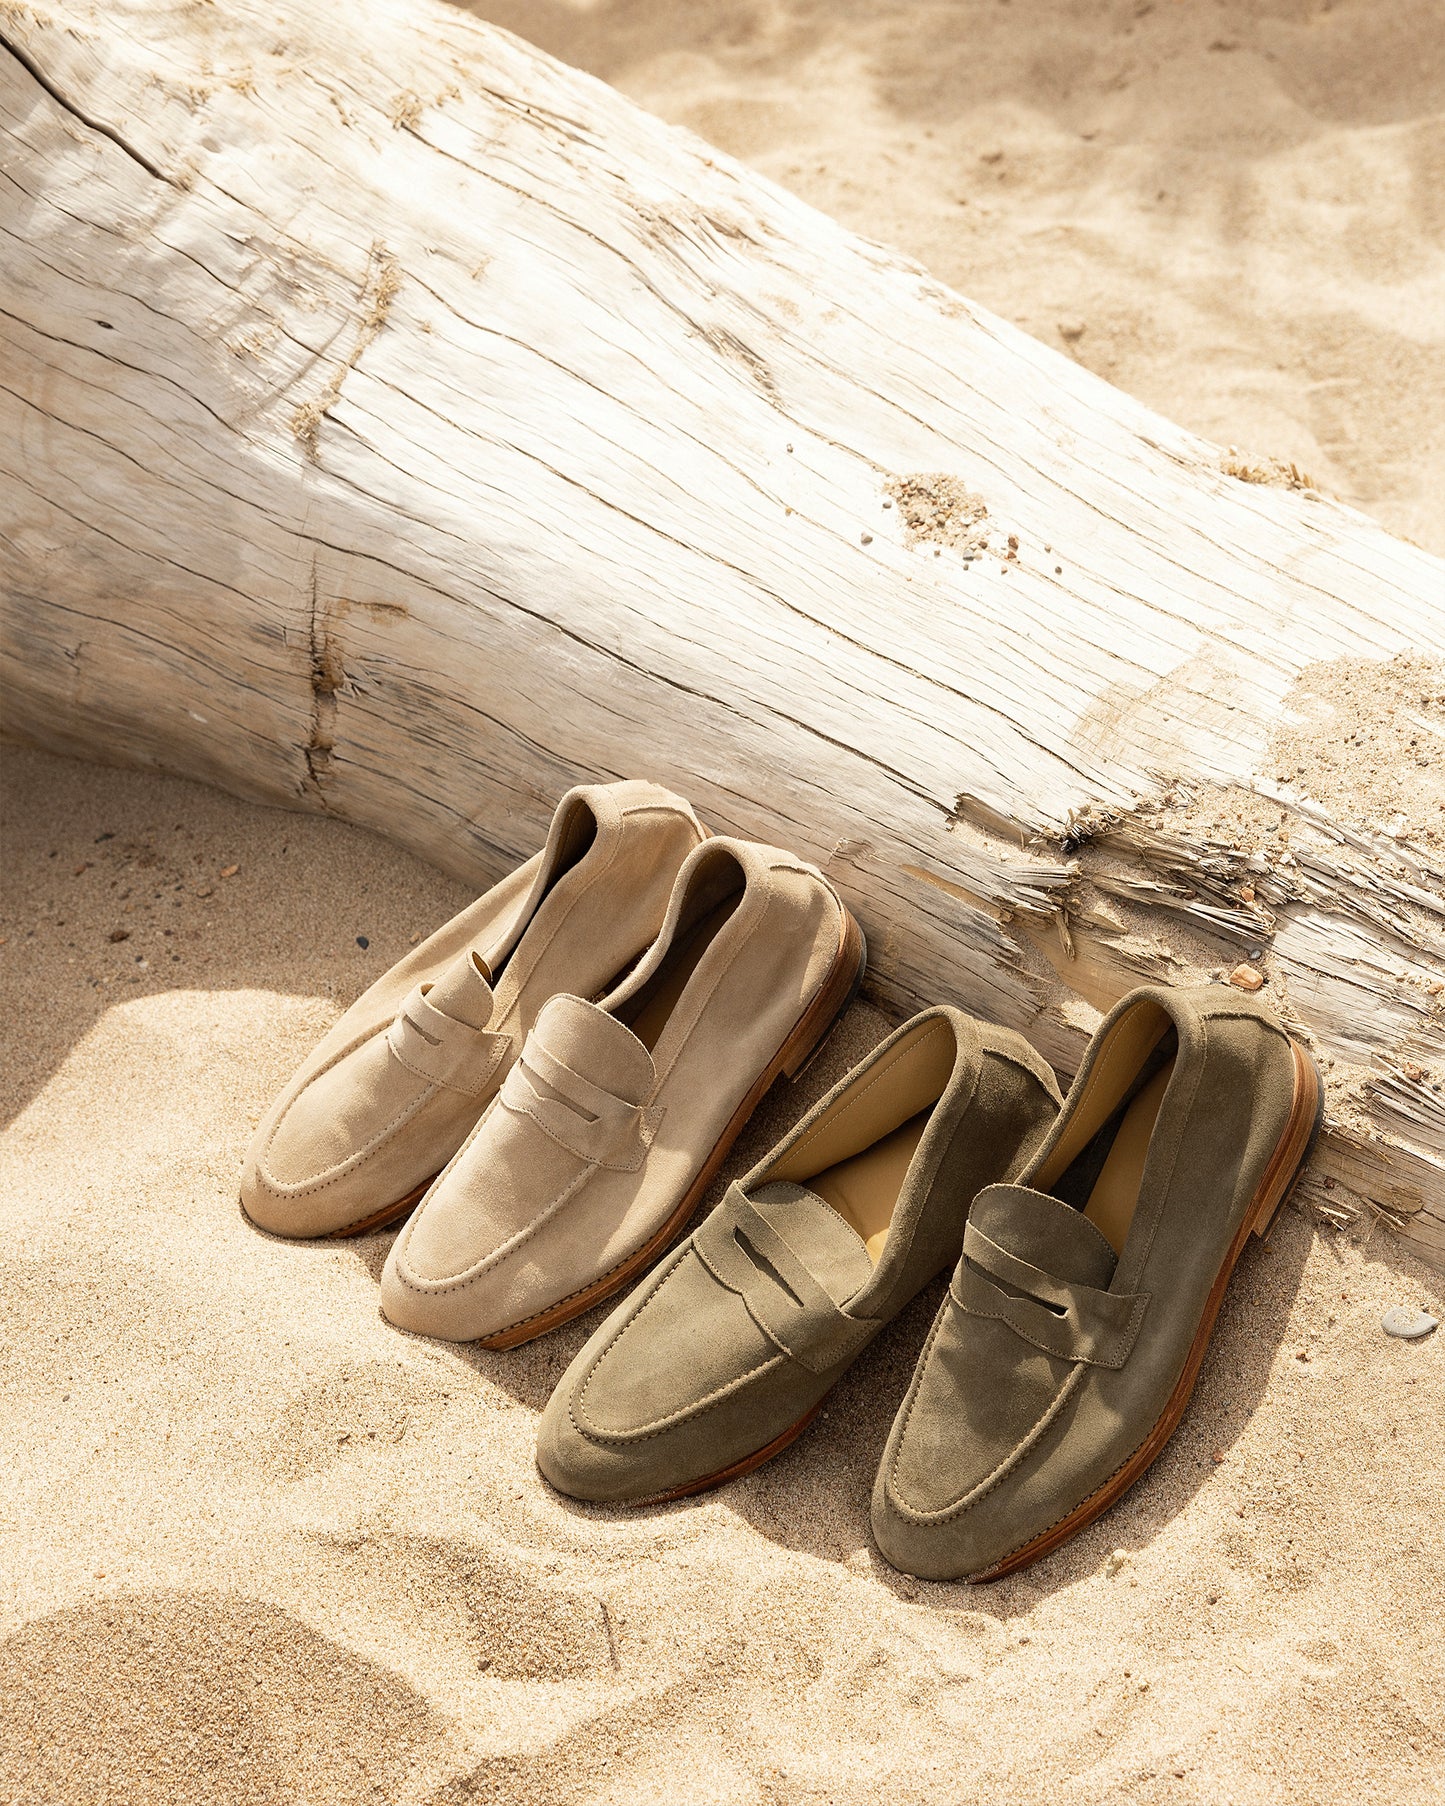 Lysekil – Sand Suede